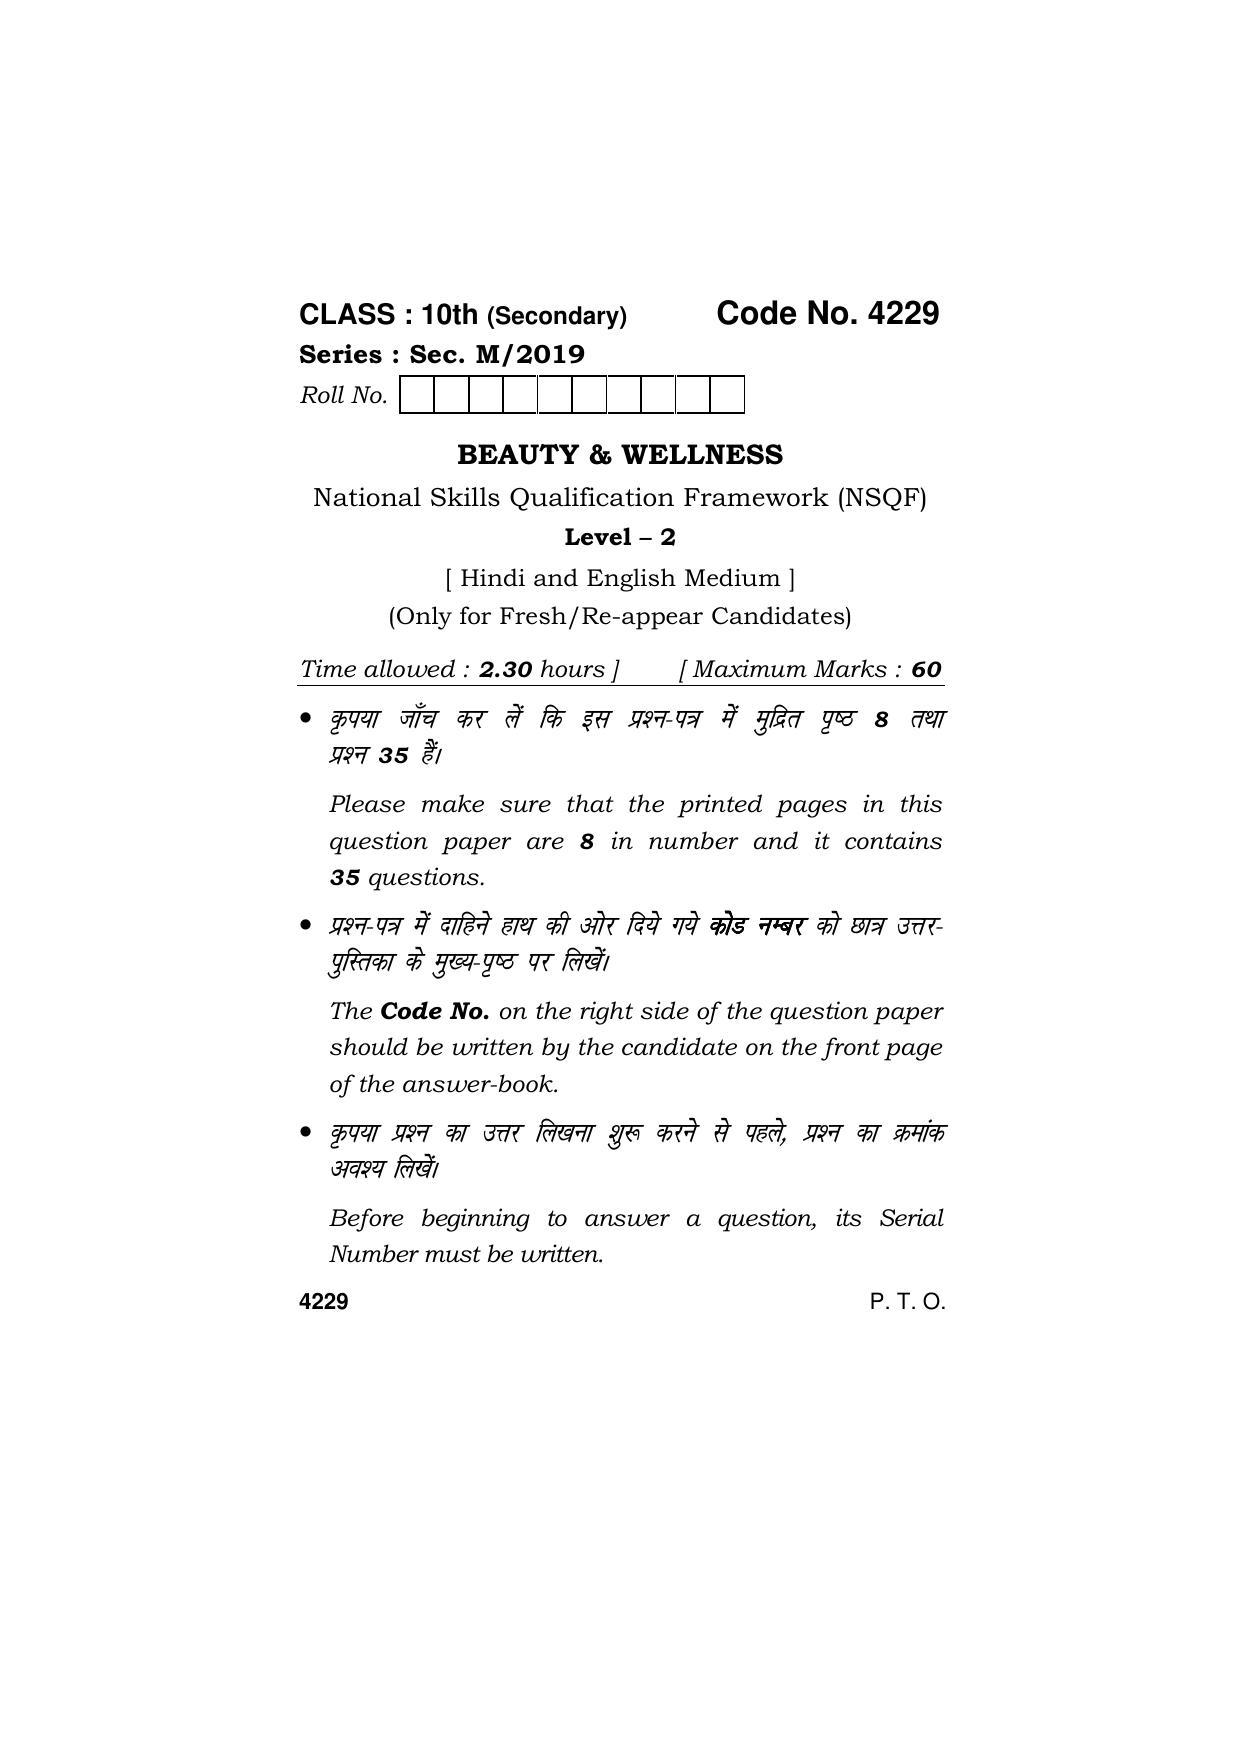 Haryana Board HBSE Class 10 Beauty & Wellness 2019 Question Paper - Page 1